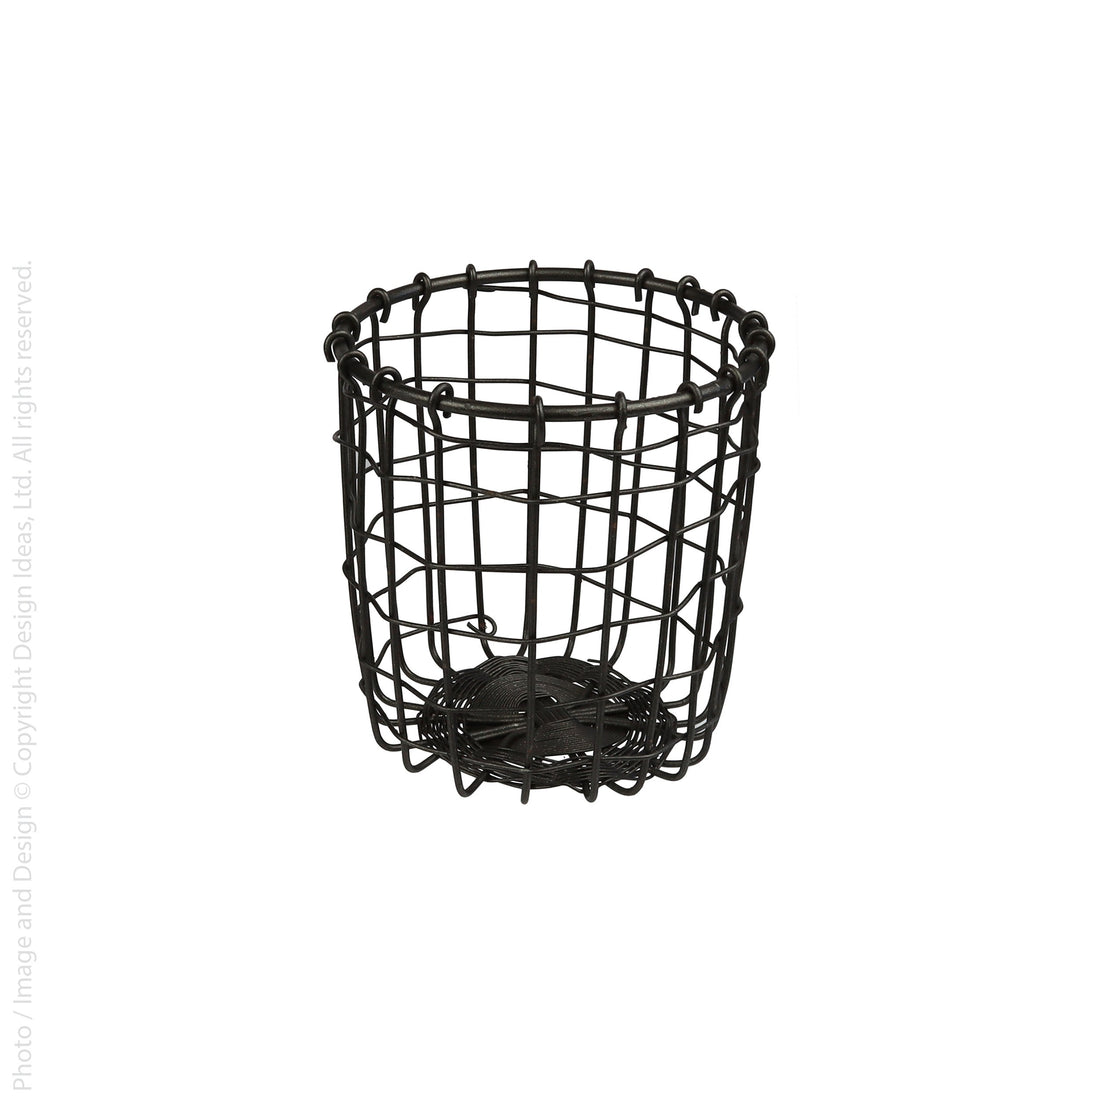 Cabo™ woven wire pencil cup